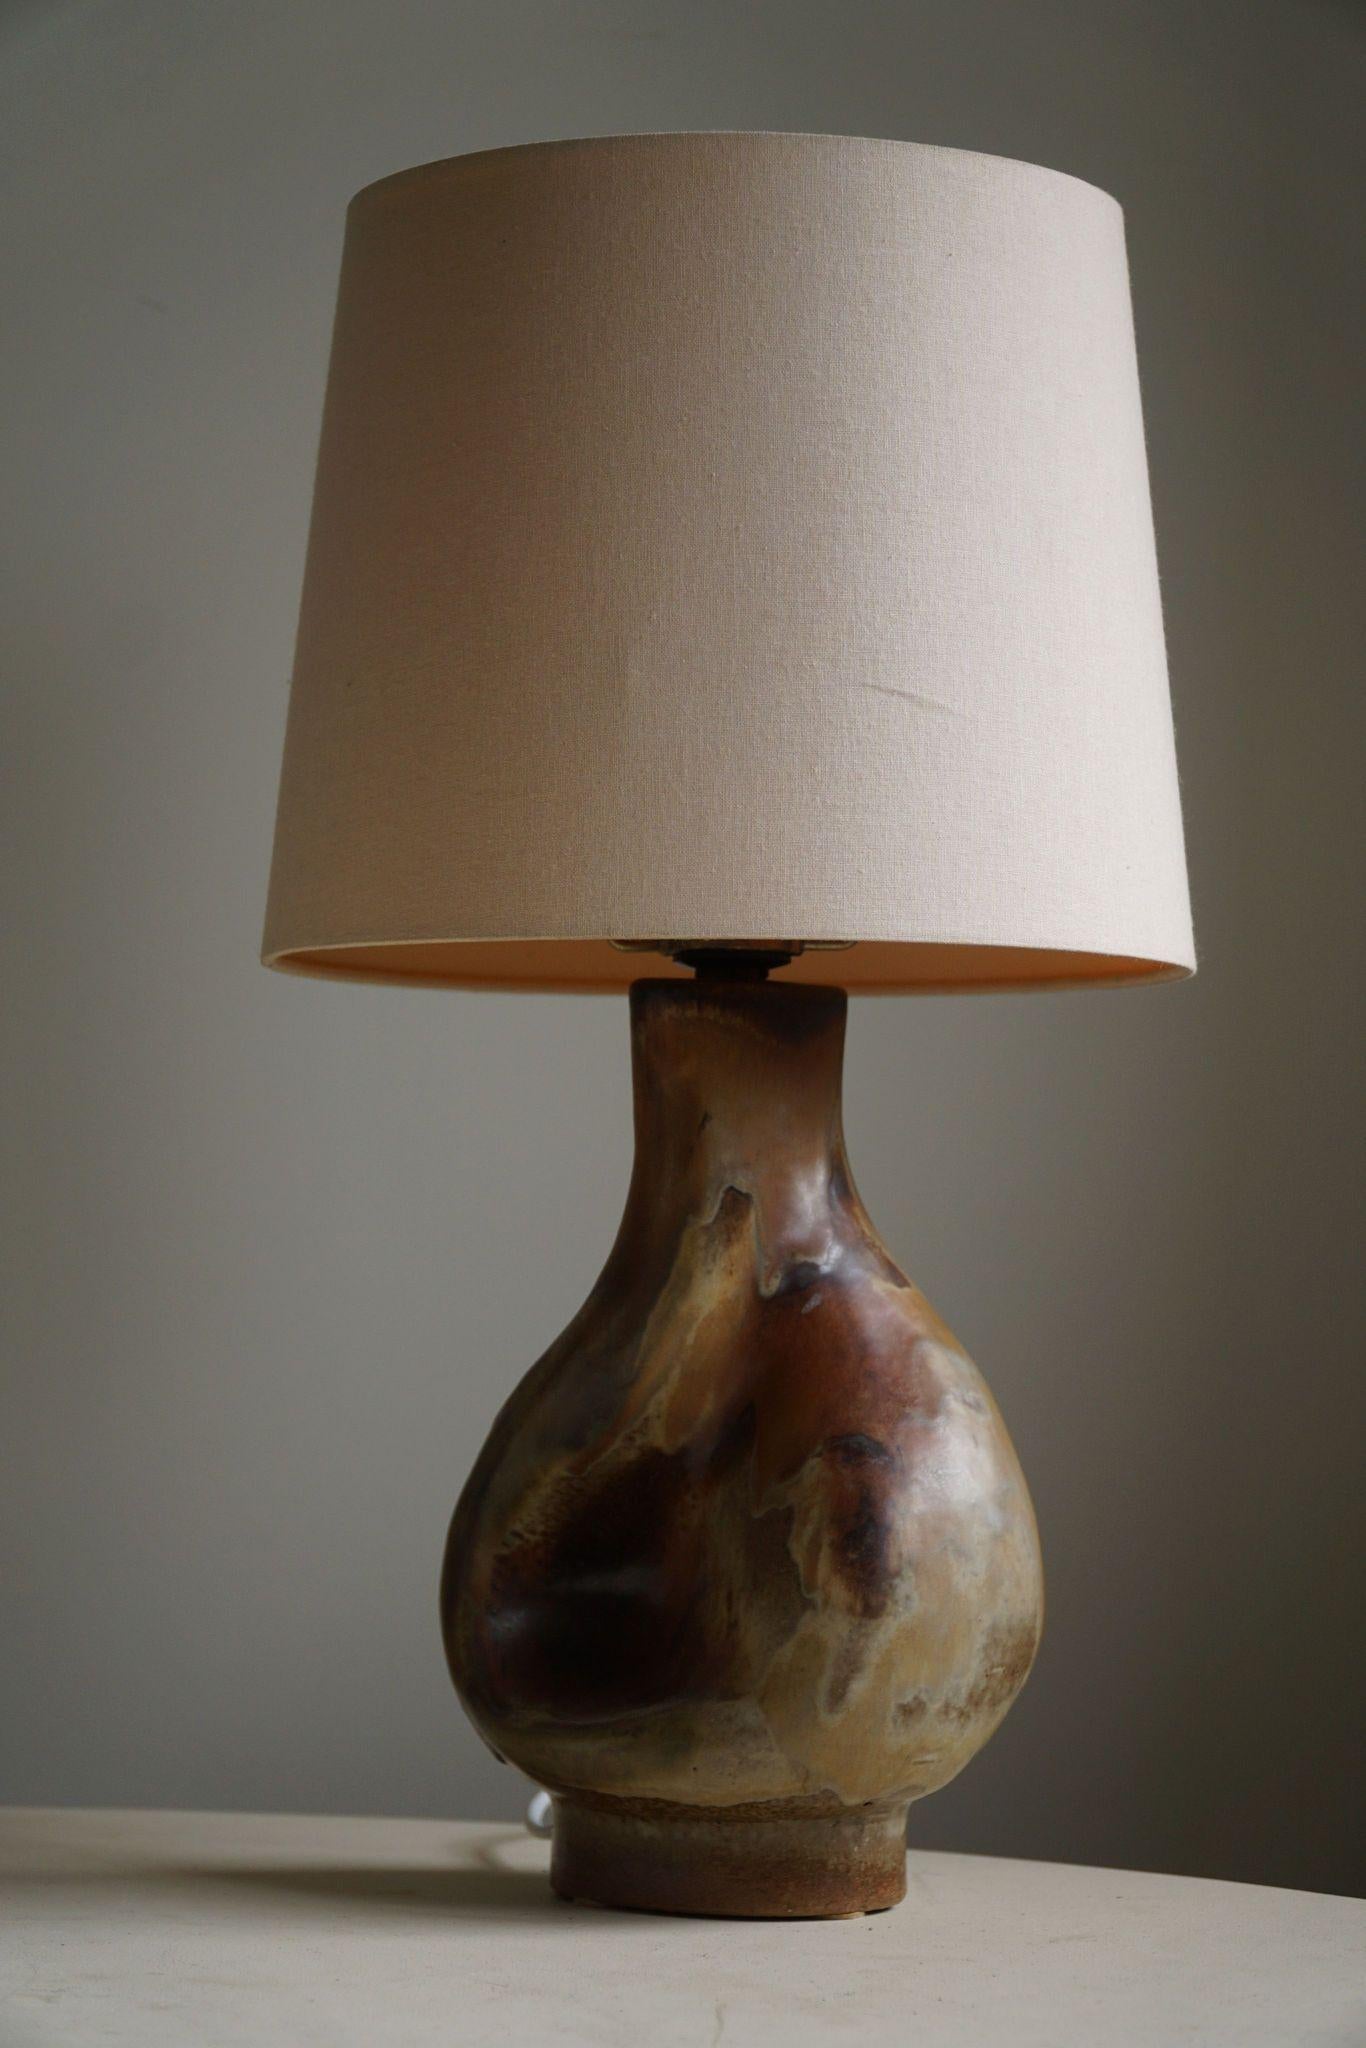 Danish Modern, Ceramic Table Lamp in Earthern Colors by Axella, 1970s In Good Condition For Sale In Odense, DK